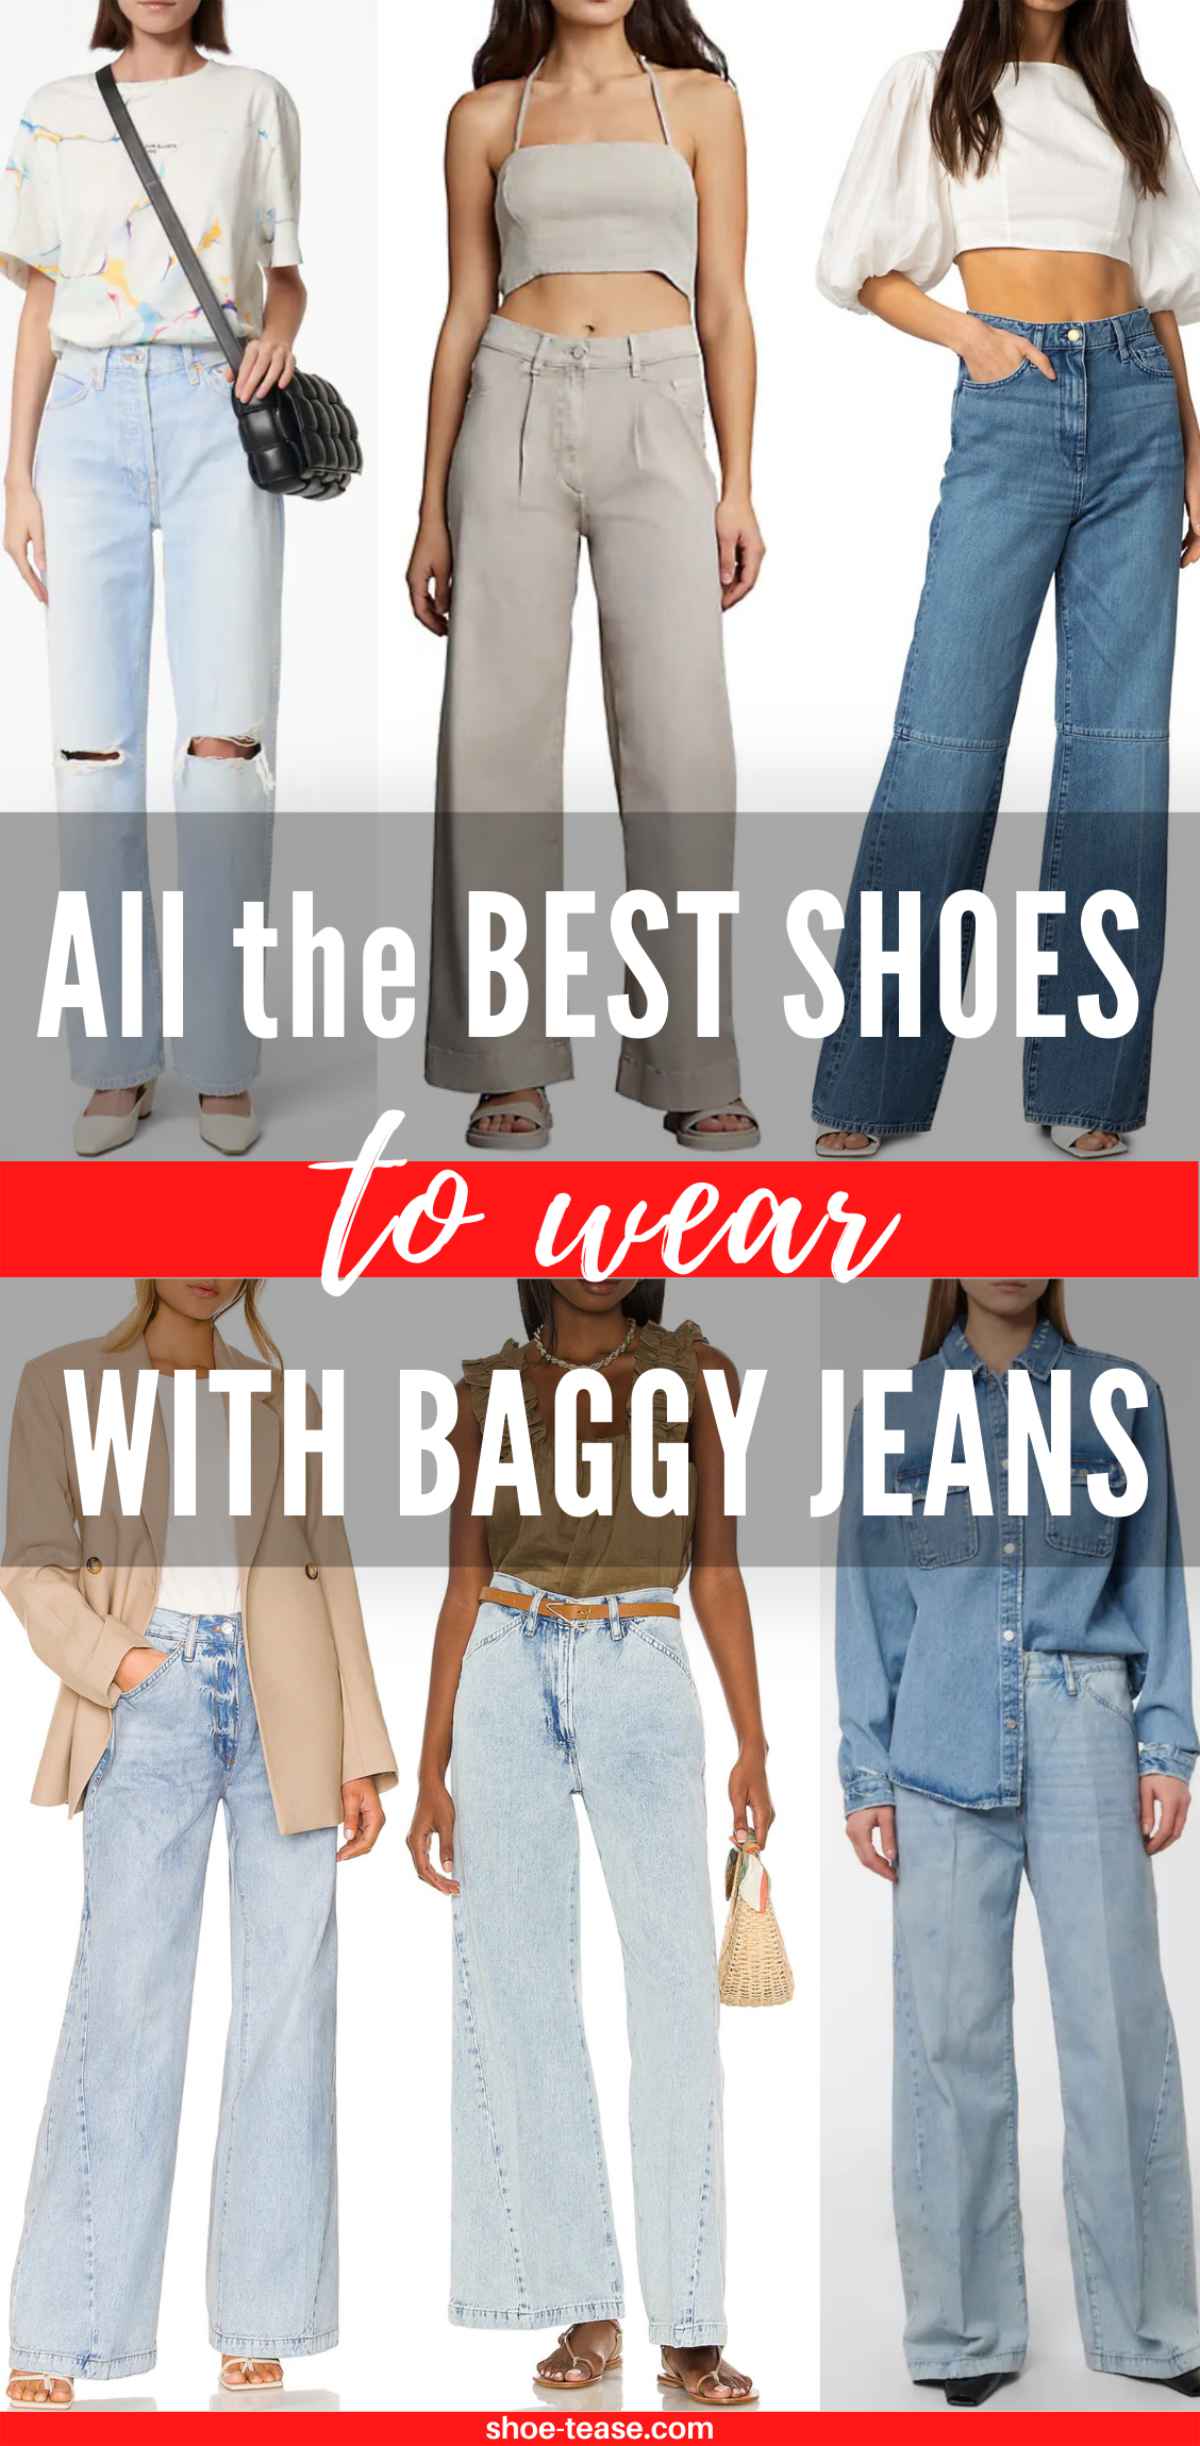 Kapper Zeker Vacature What Shoes to Wear with Baggy Jeans Outfits for Women | ShoeTease